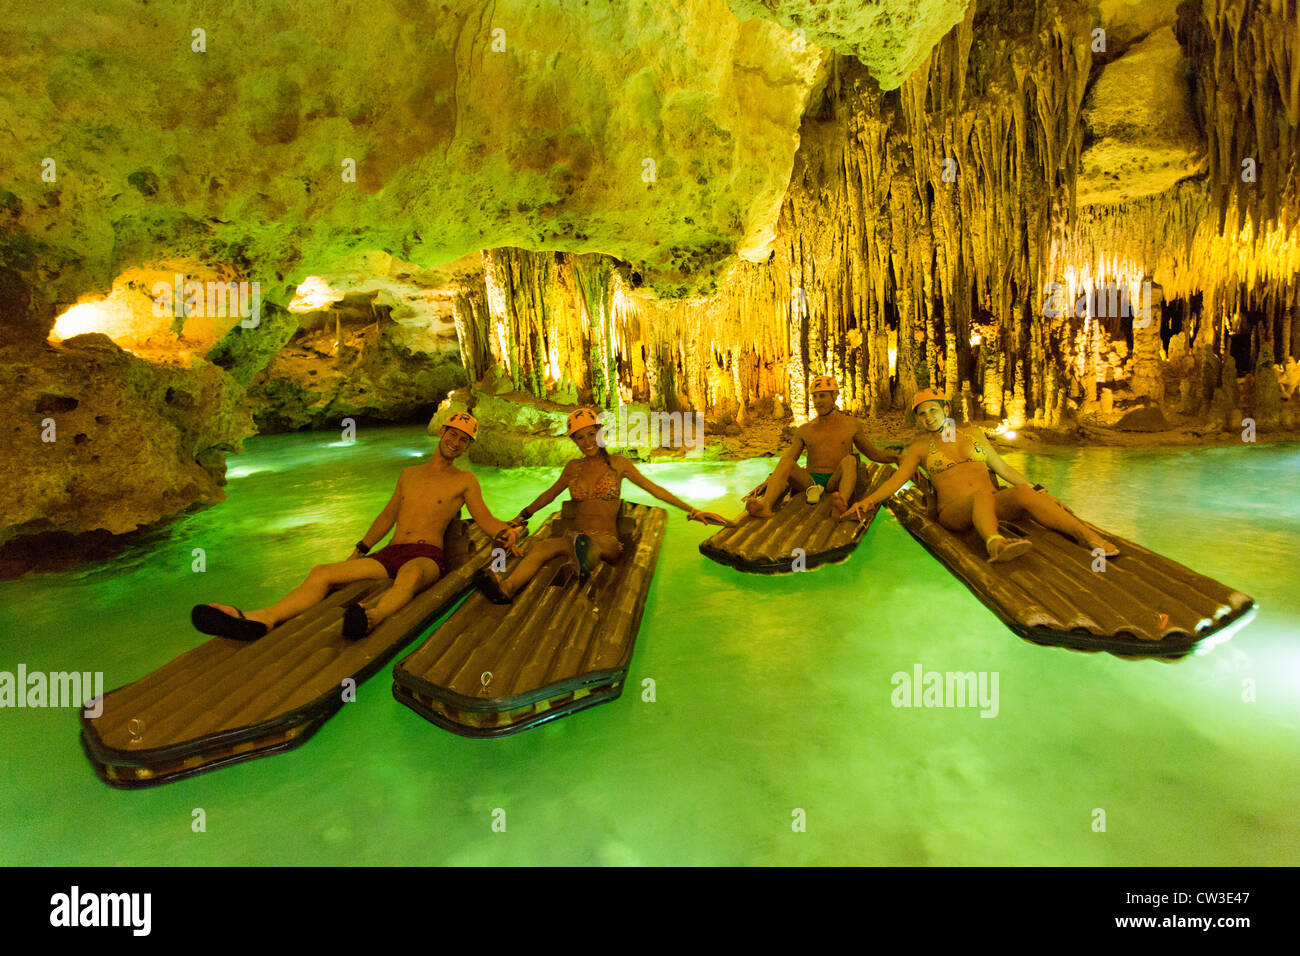 Mexico, Mayan Riviera,Xplor Adventure Park,people rafting on river in a cenote Stock Photo